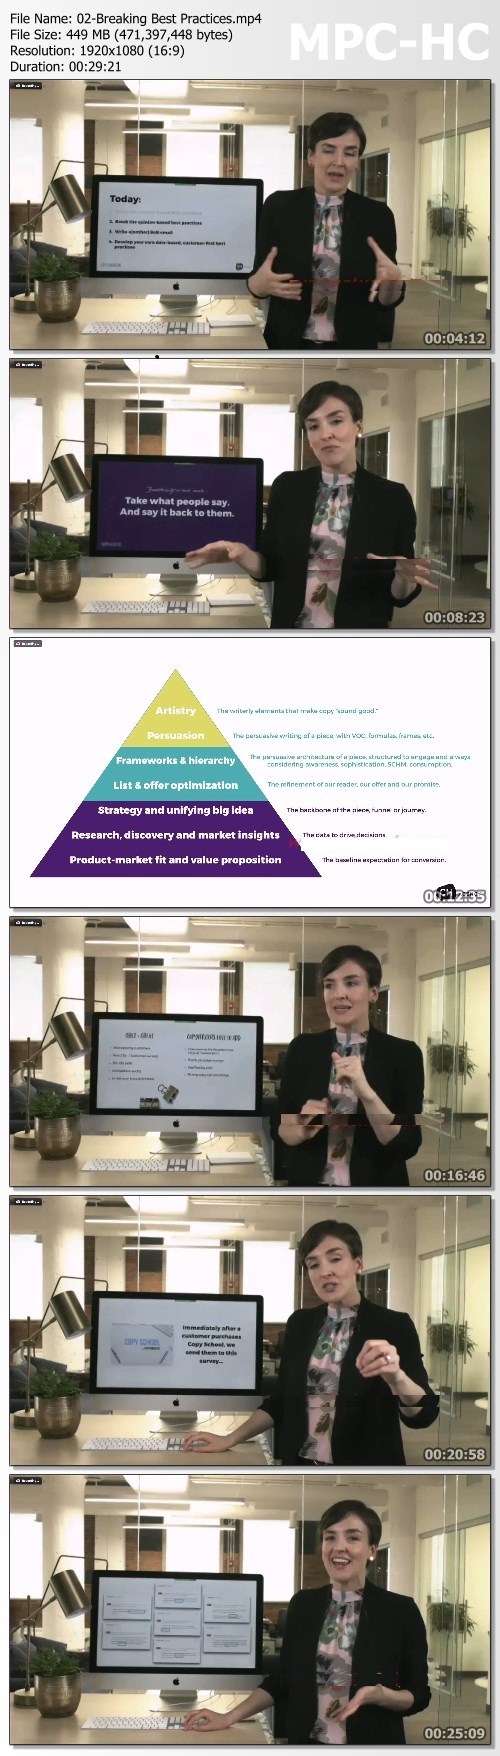 Joanna Wiebe - How to STOP Boring Your Email Subscribers...and START Driving Clicks